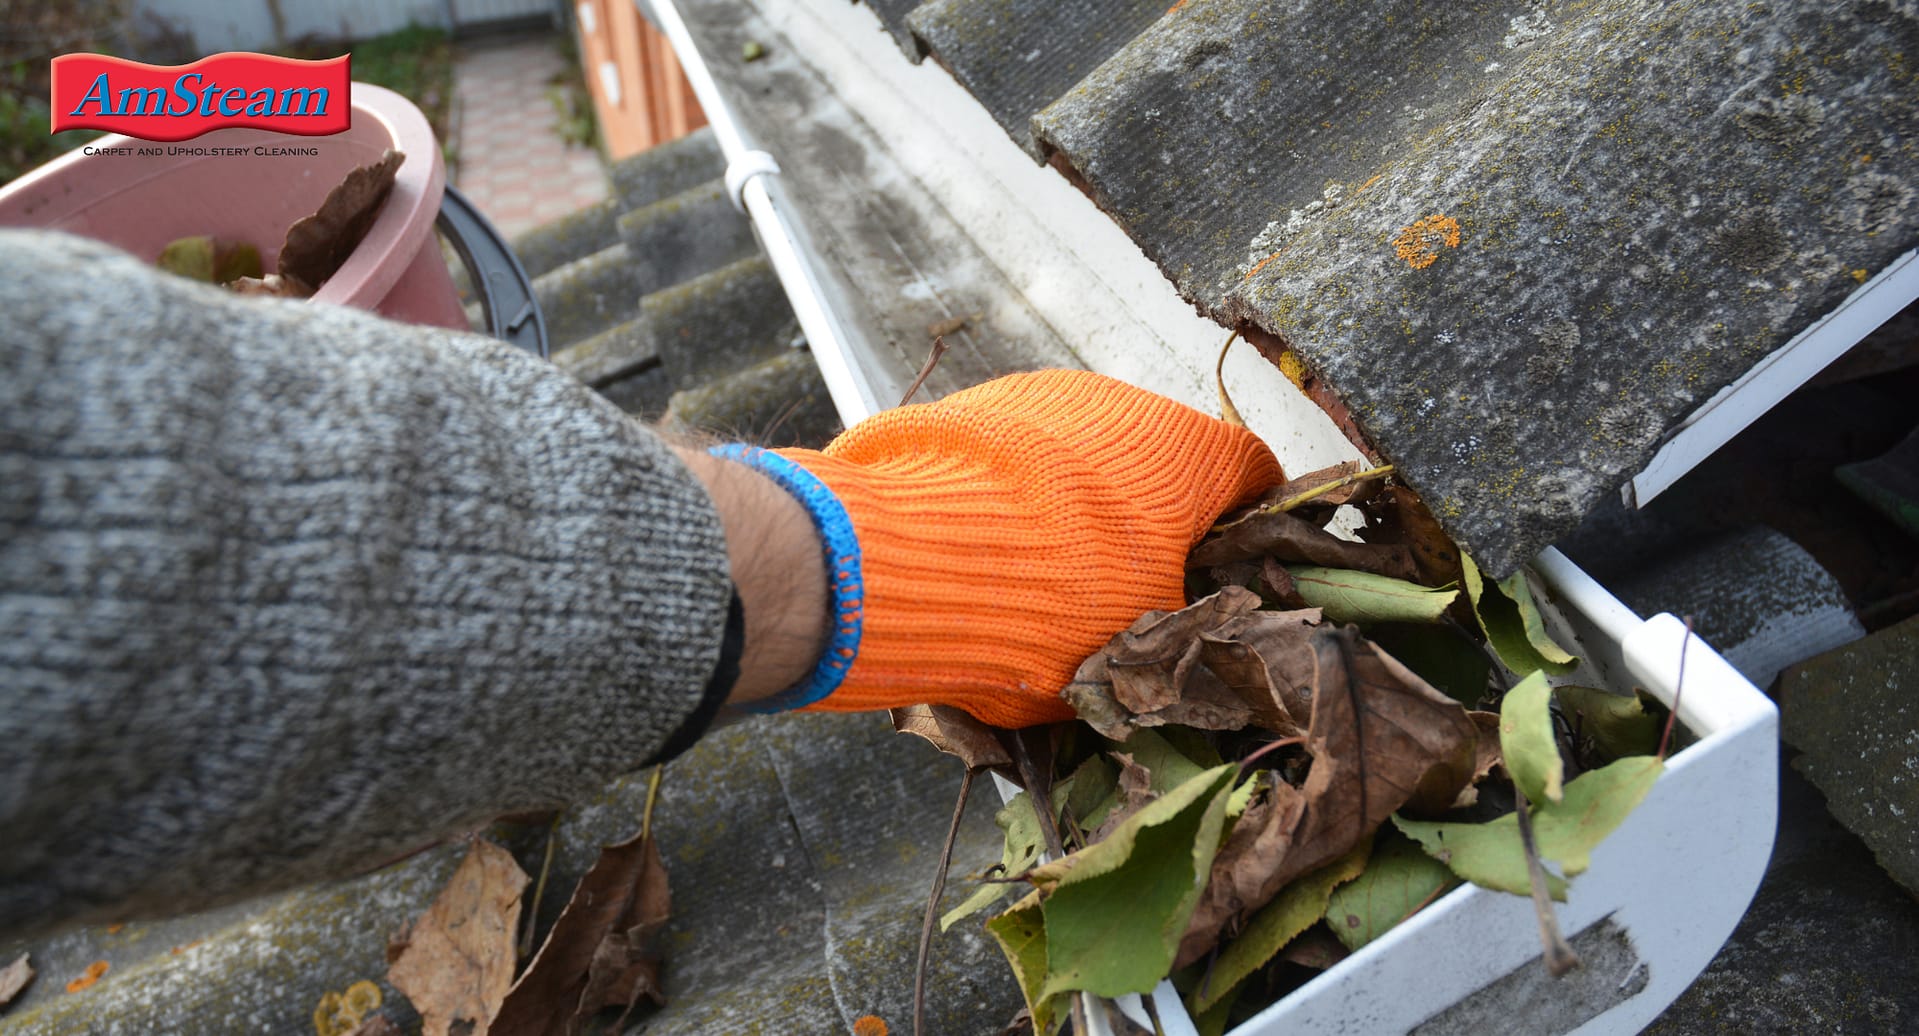 Cleaning out gutters to help prevent water damage to the home.